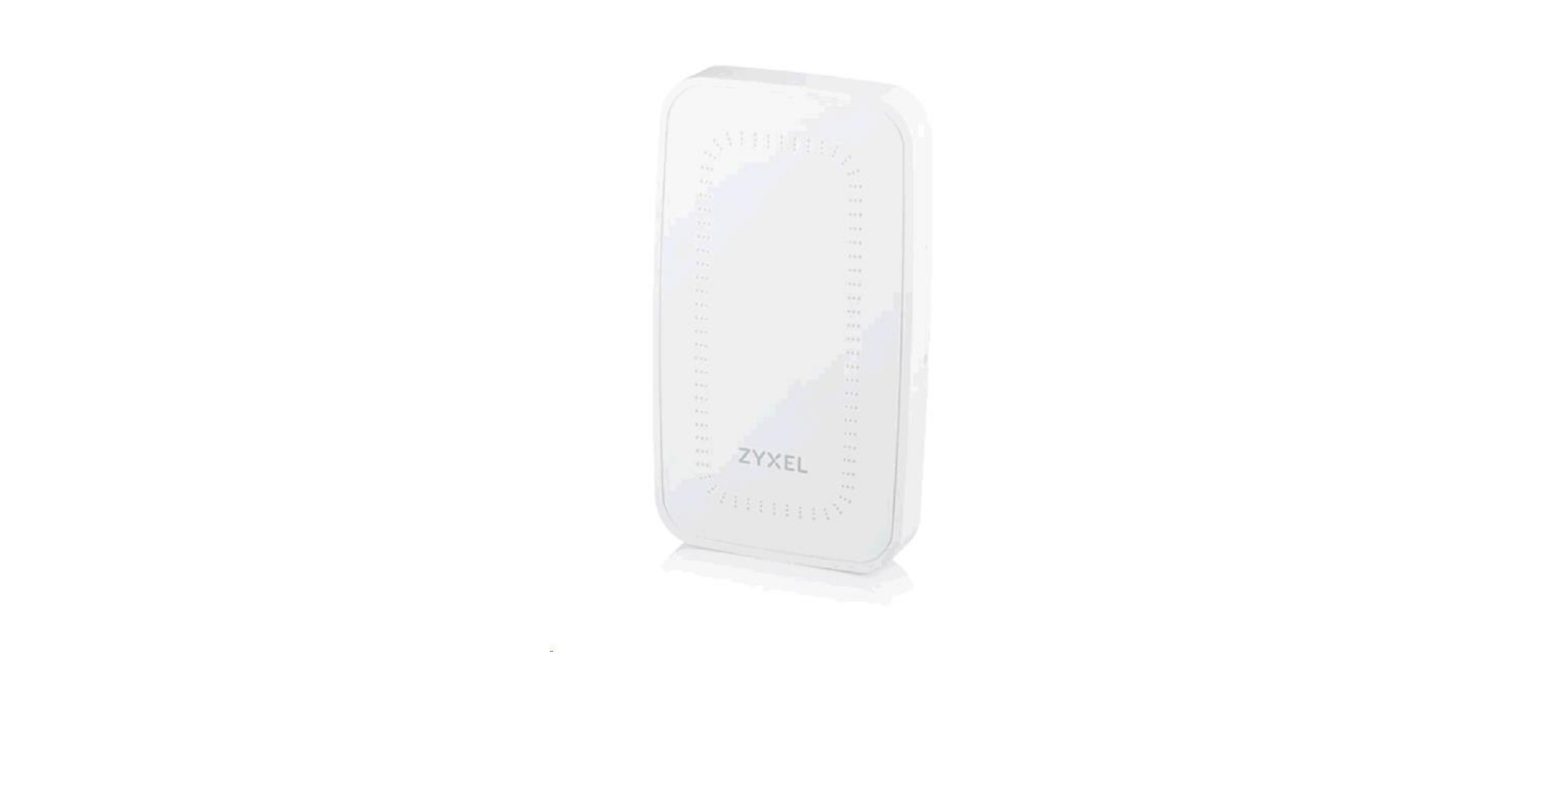 ZYXEL WAC500H 802.11ac Wave 2 Wall Plate Unified Access Point User Guide